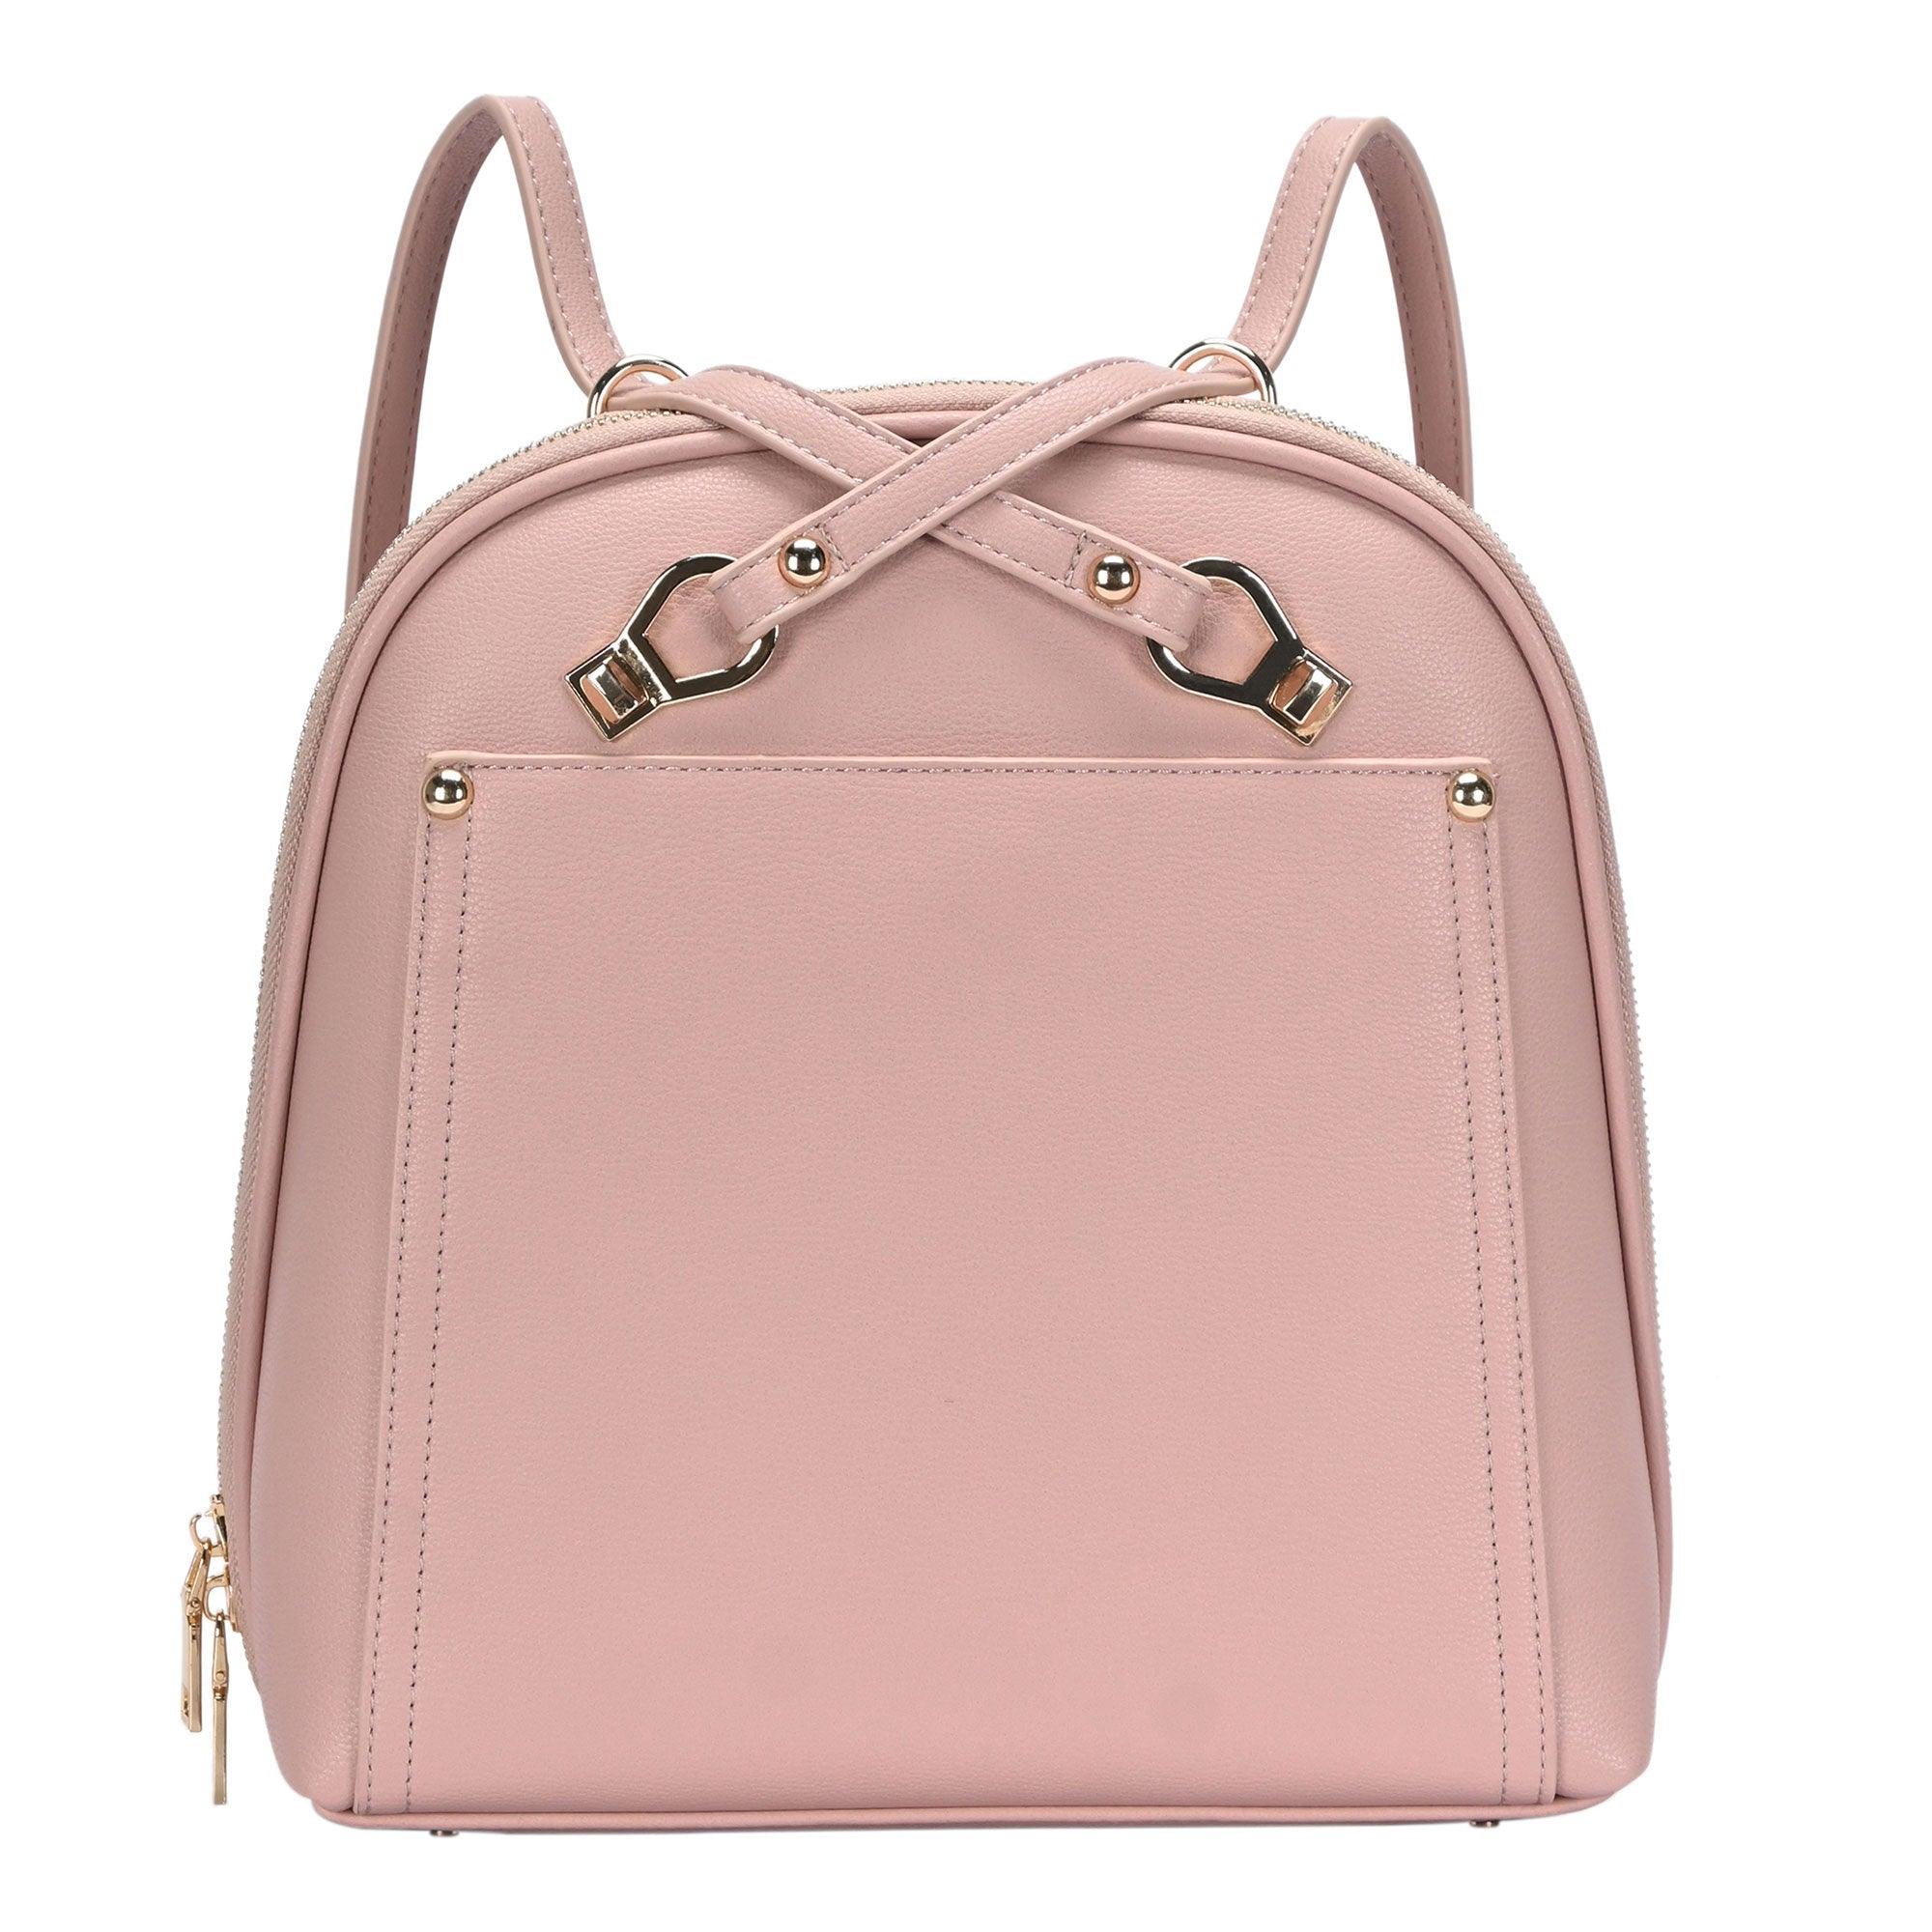 Multi Compartment Color Blocked Handbag In Pink (m) at Rs 1290.00 | Leather  Handbag | ID: 25509887088